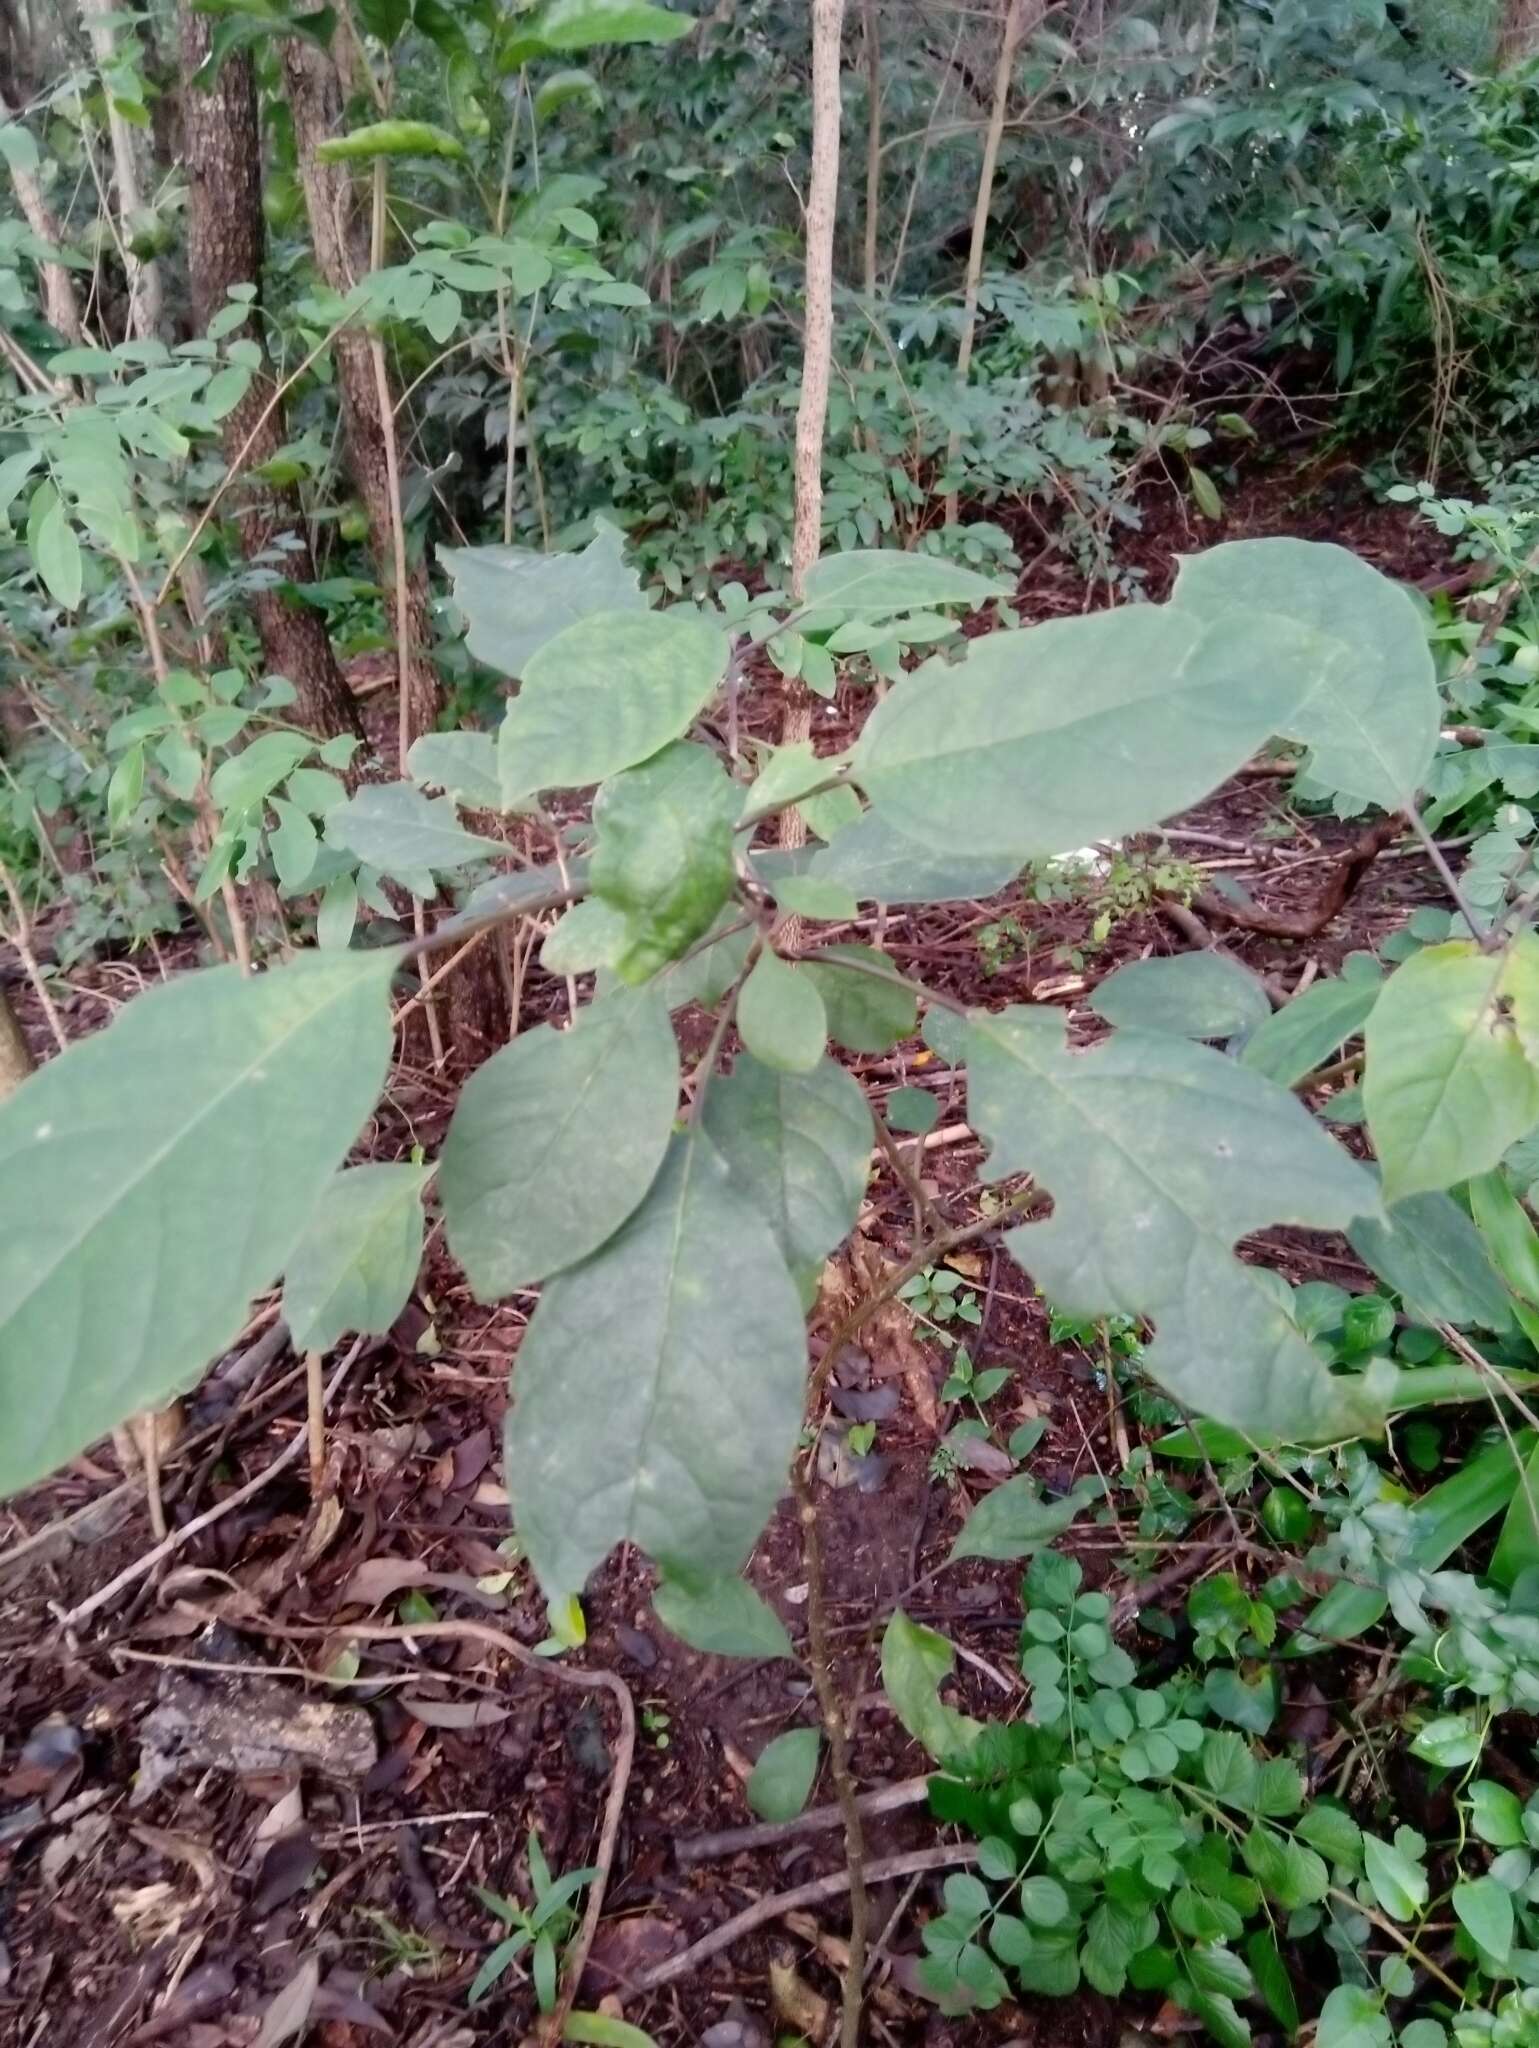 Image of Clerodendrum tomentosum (Vent.) R. Br.